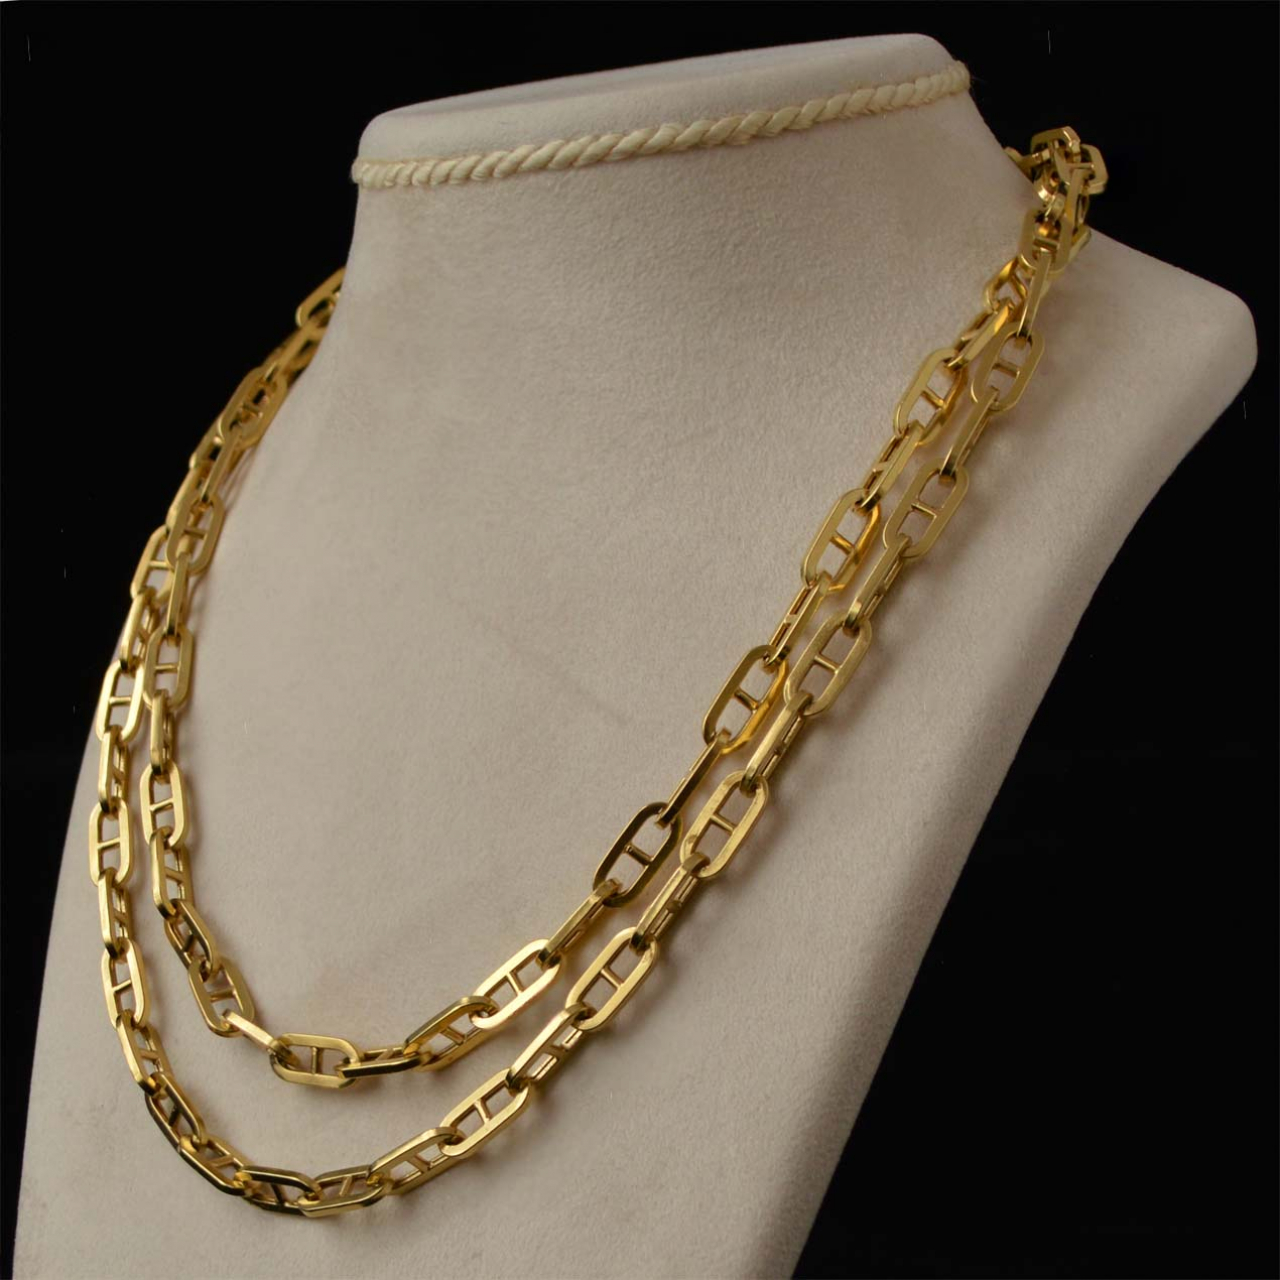 18K gold anchor link chain - Rocks and Clocks